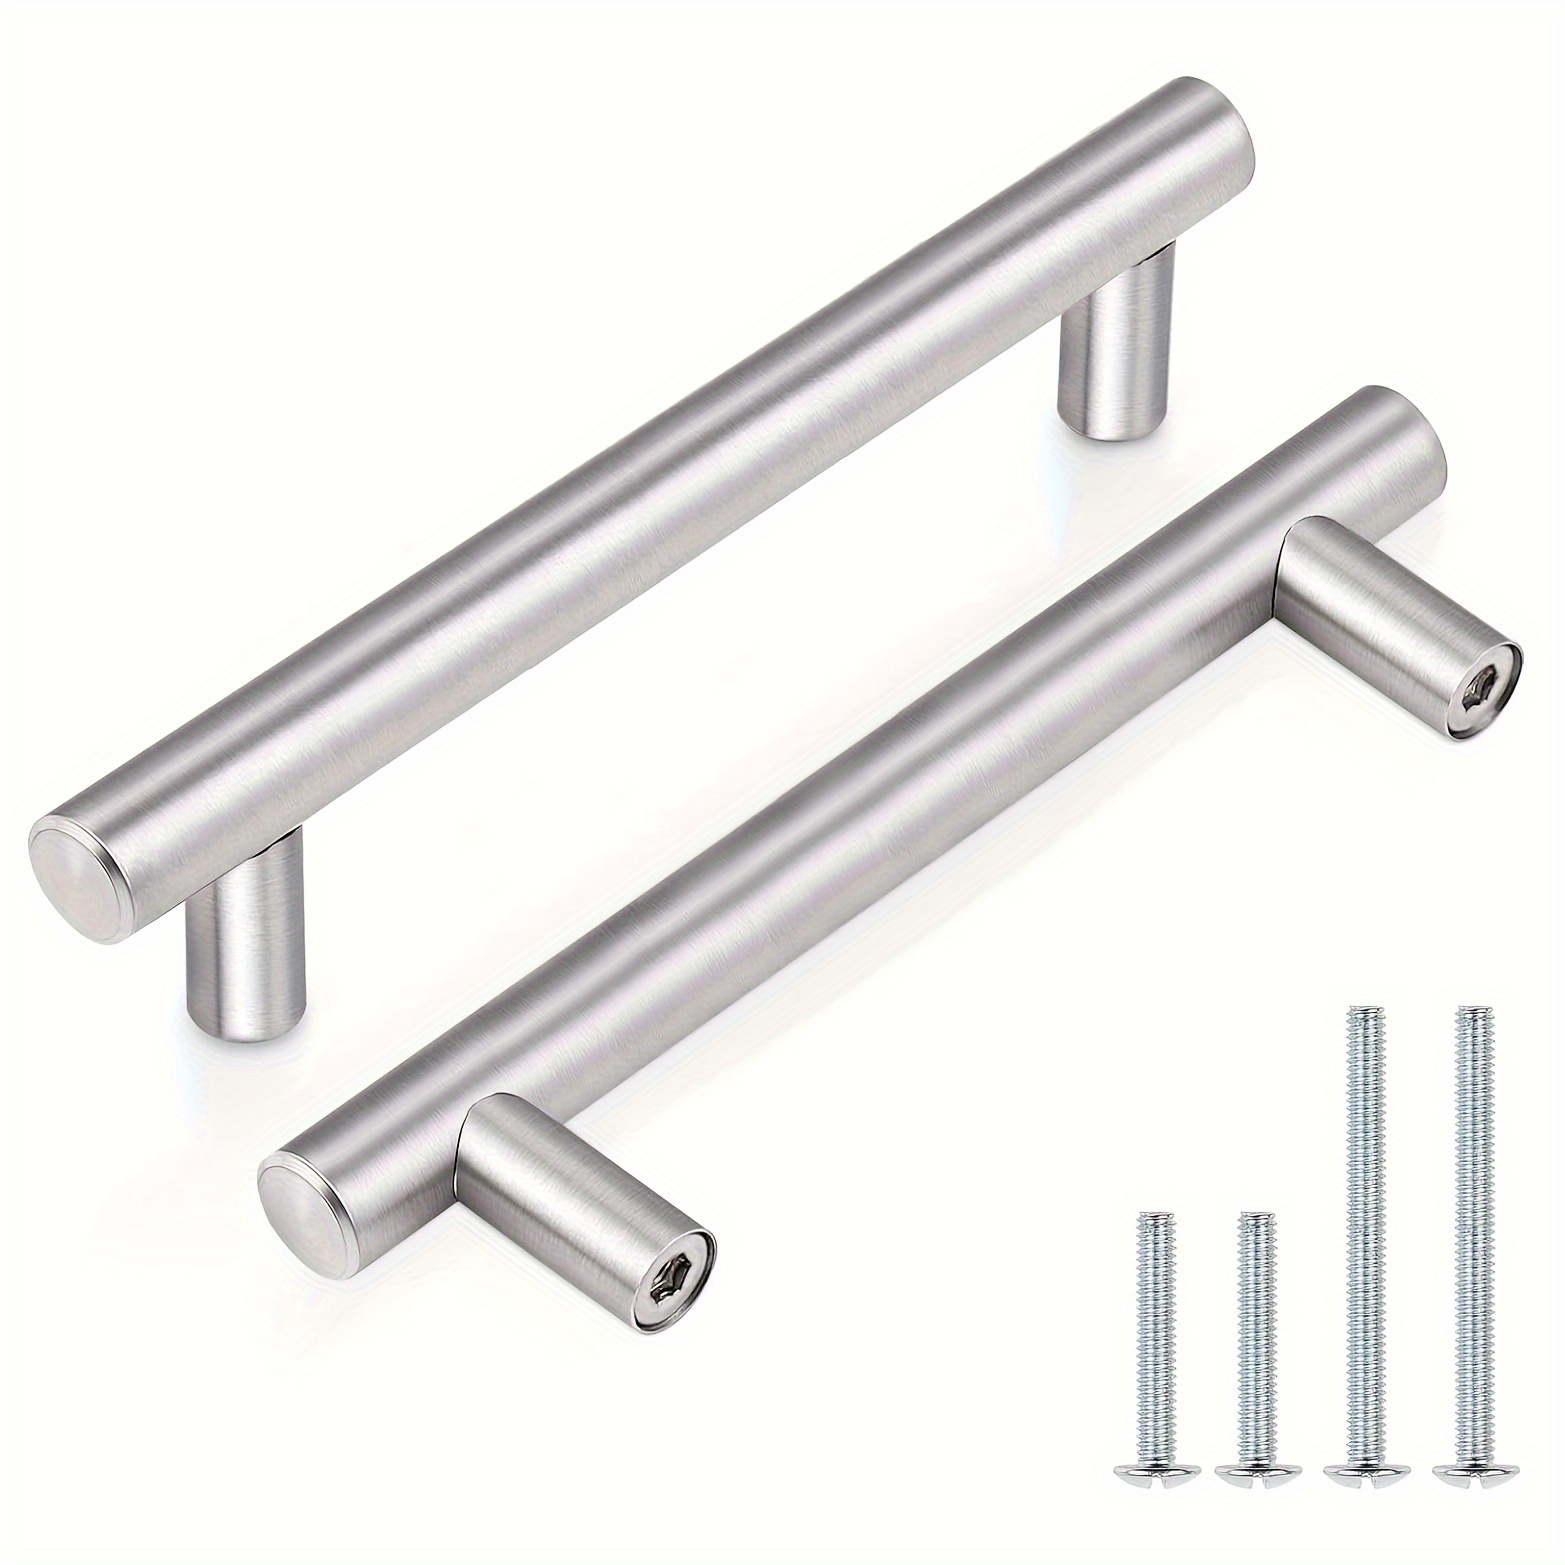 

10-25 Pack Kitchen Cabinet Pulls, 3-3/4 Inch Hole Center Solid Iron Drawer T-bar Handles, Polished Metal With Brushed Nickel Finish, Includes Installation Hardware For Cabinets